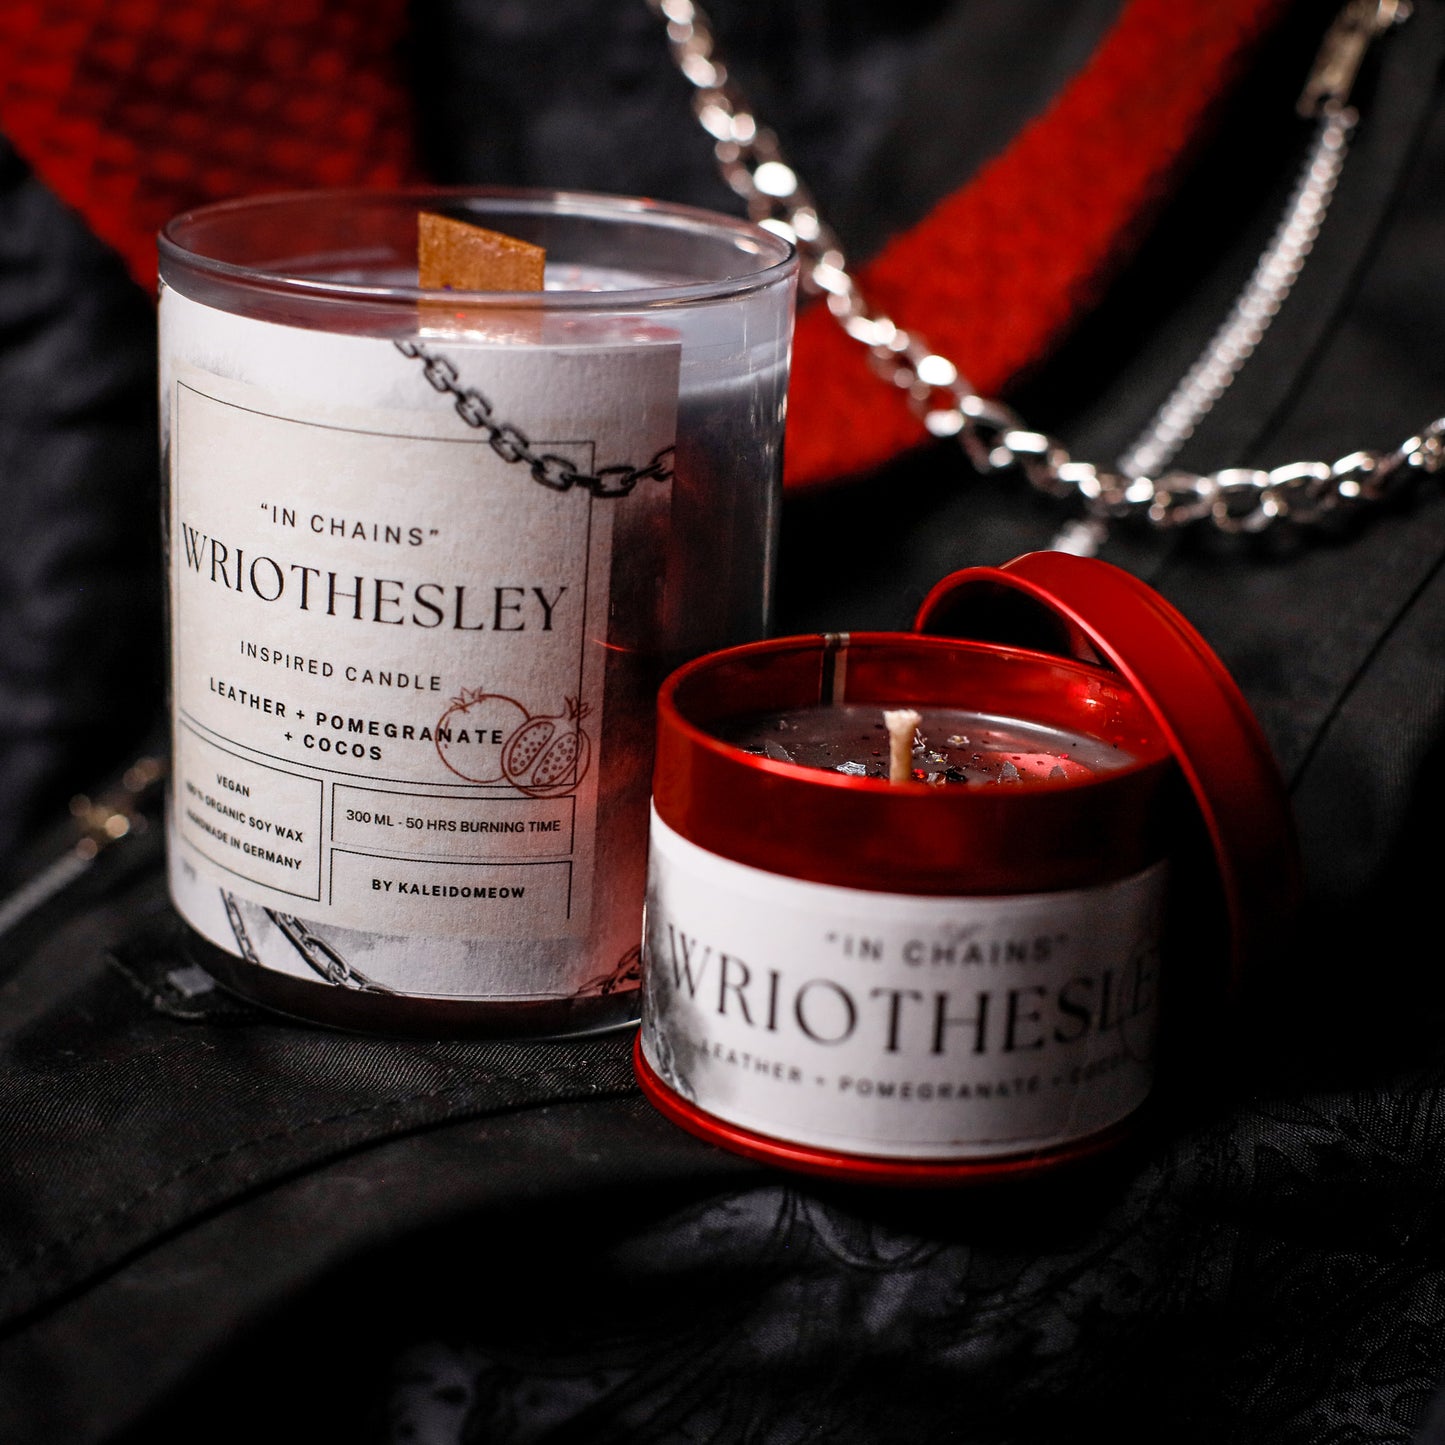 Wriothesley inspired candle - 'In Chains' Genshin inspired scented candle 300 ML